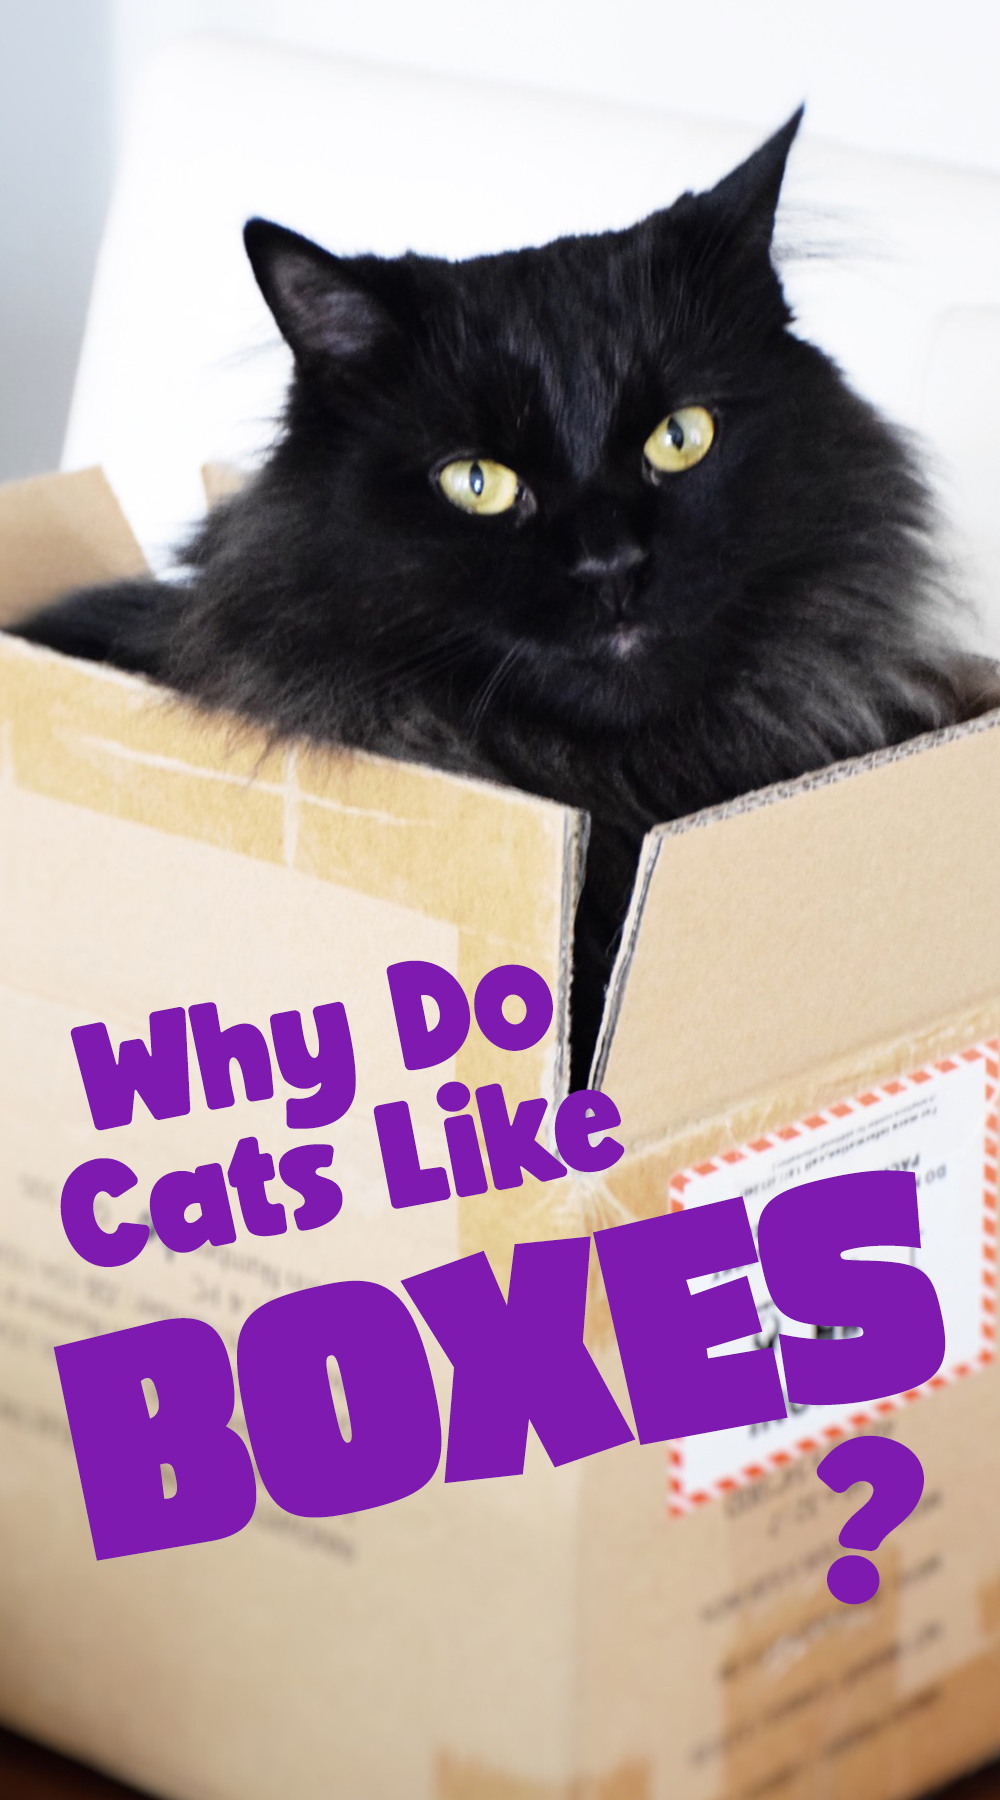 WhyCatsLikeBoxes